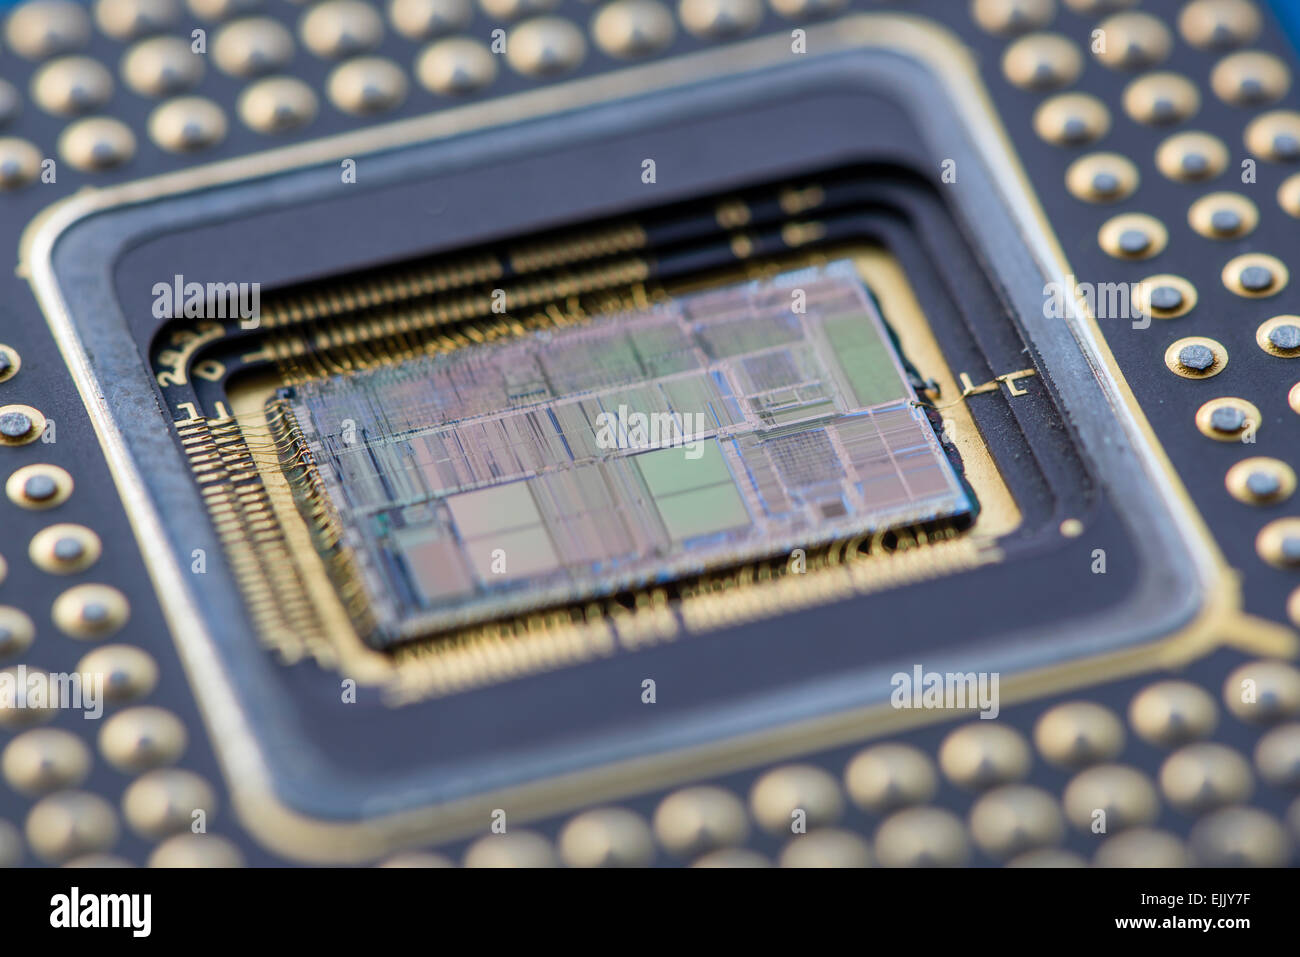 Close-up of an opened Intel 80486DX (i486) microprocessor, one of the most popular CPUs for personal computers in the 90ties. Stock Photo